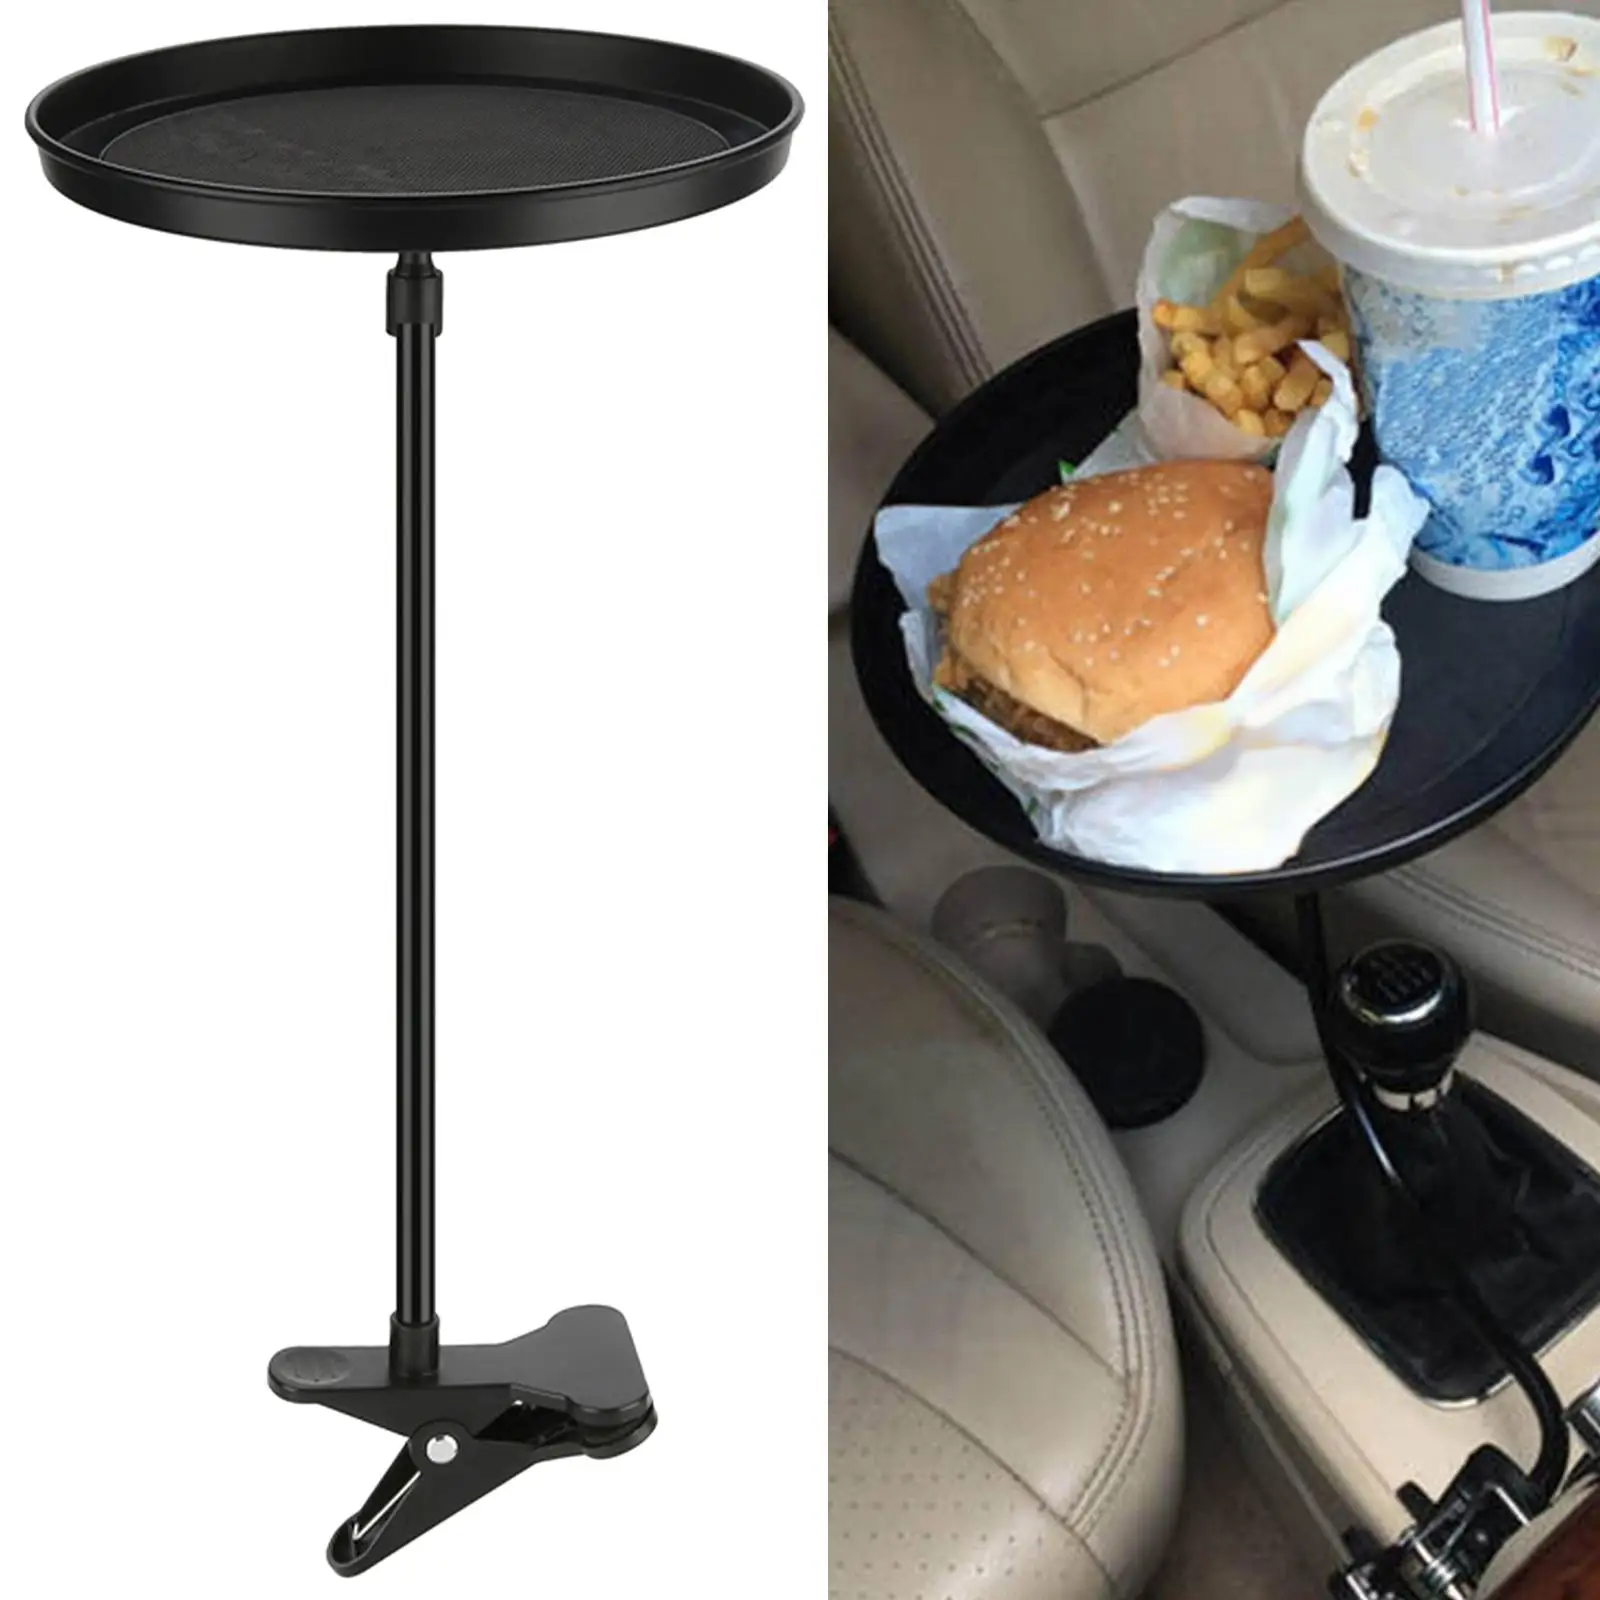 1Pcs Car Food Tray Anti-Slip Plastic Adjustable Round Universal Holder with Clamp Fits for Passenger Seat Bottle Coffee Auto